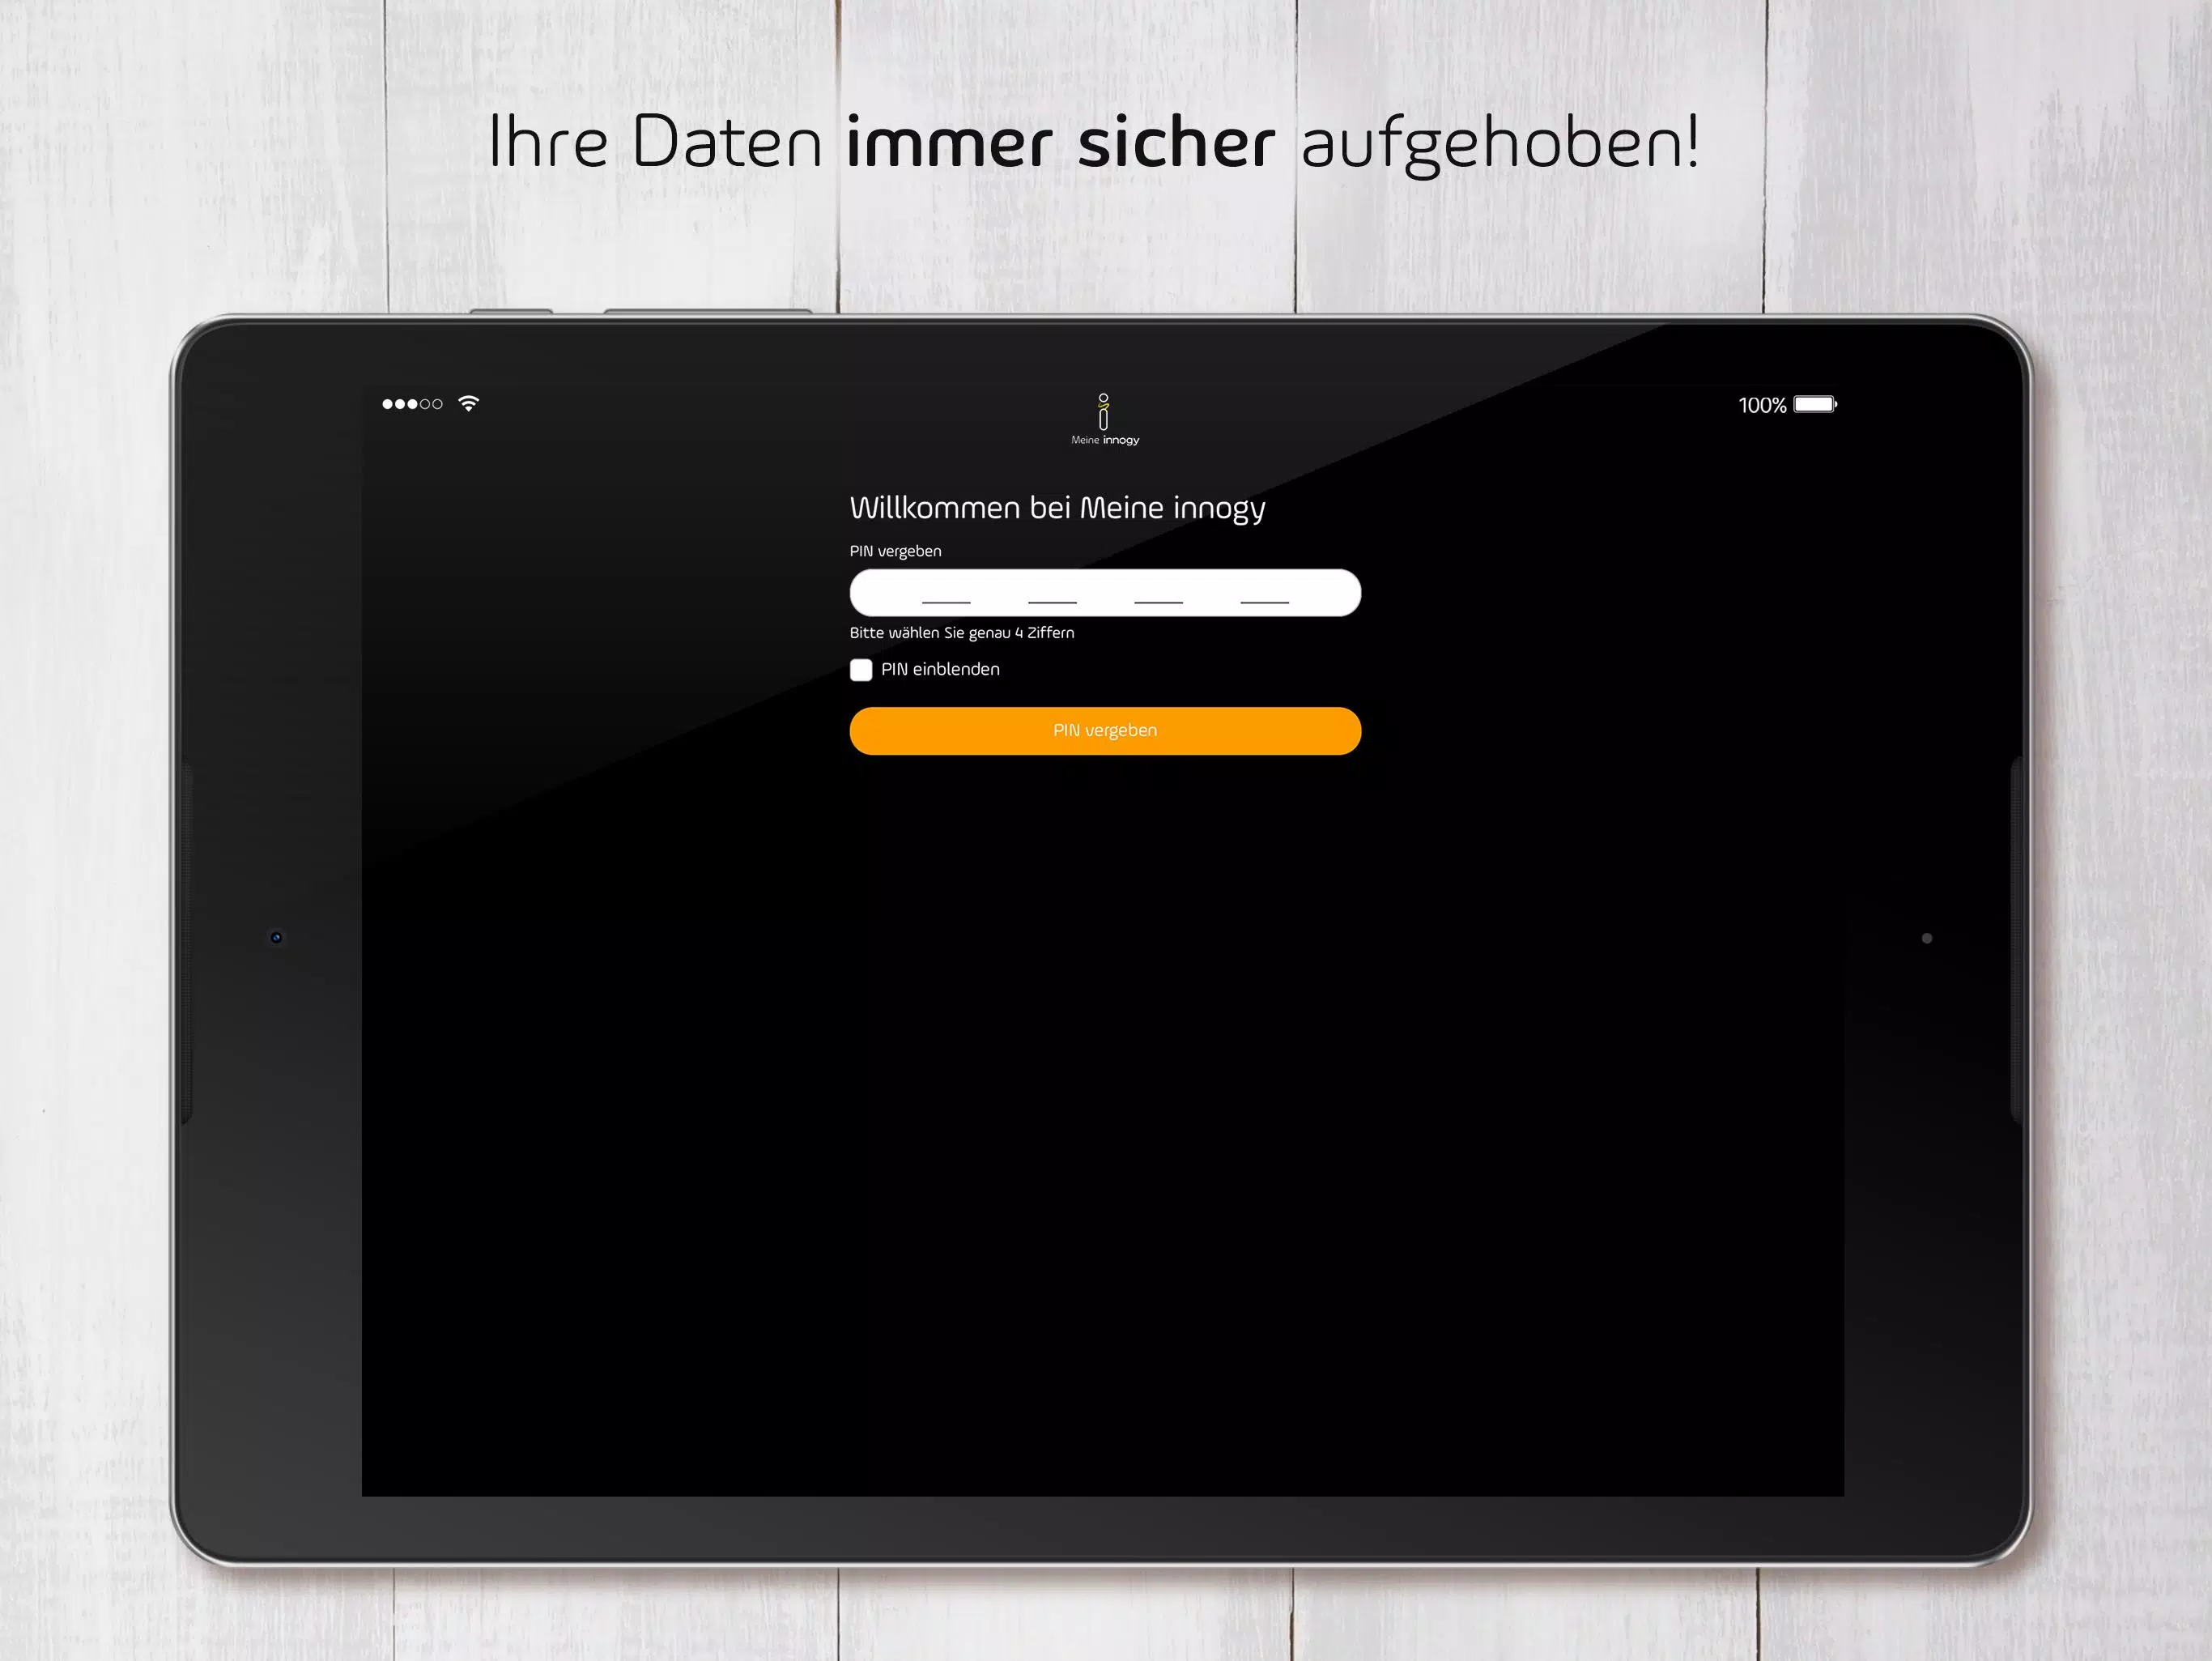 Meine innogy for Android - APK Download